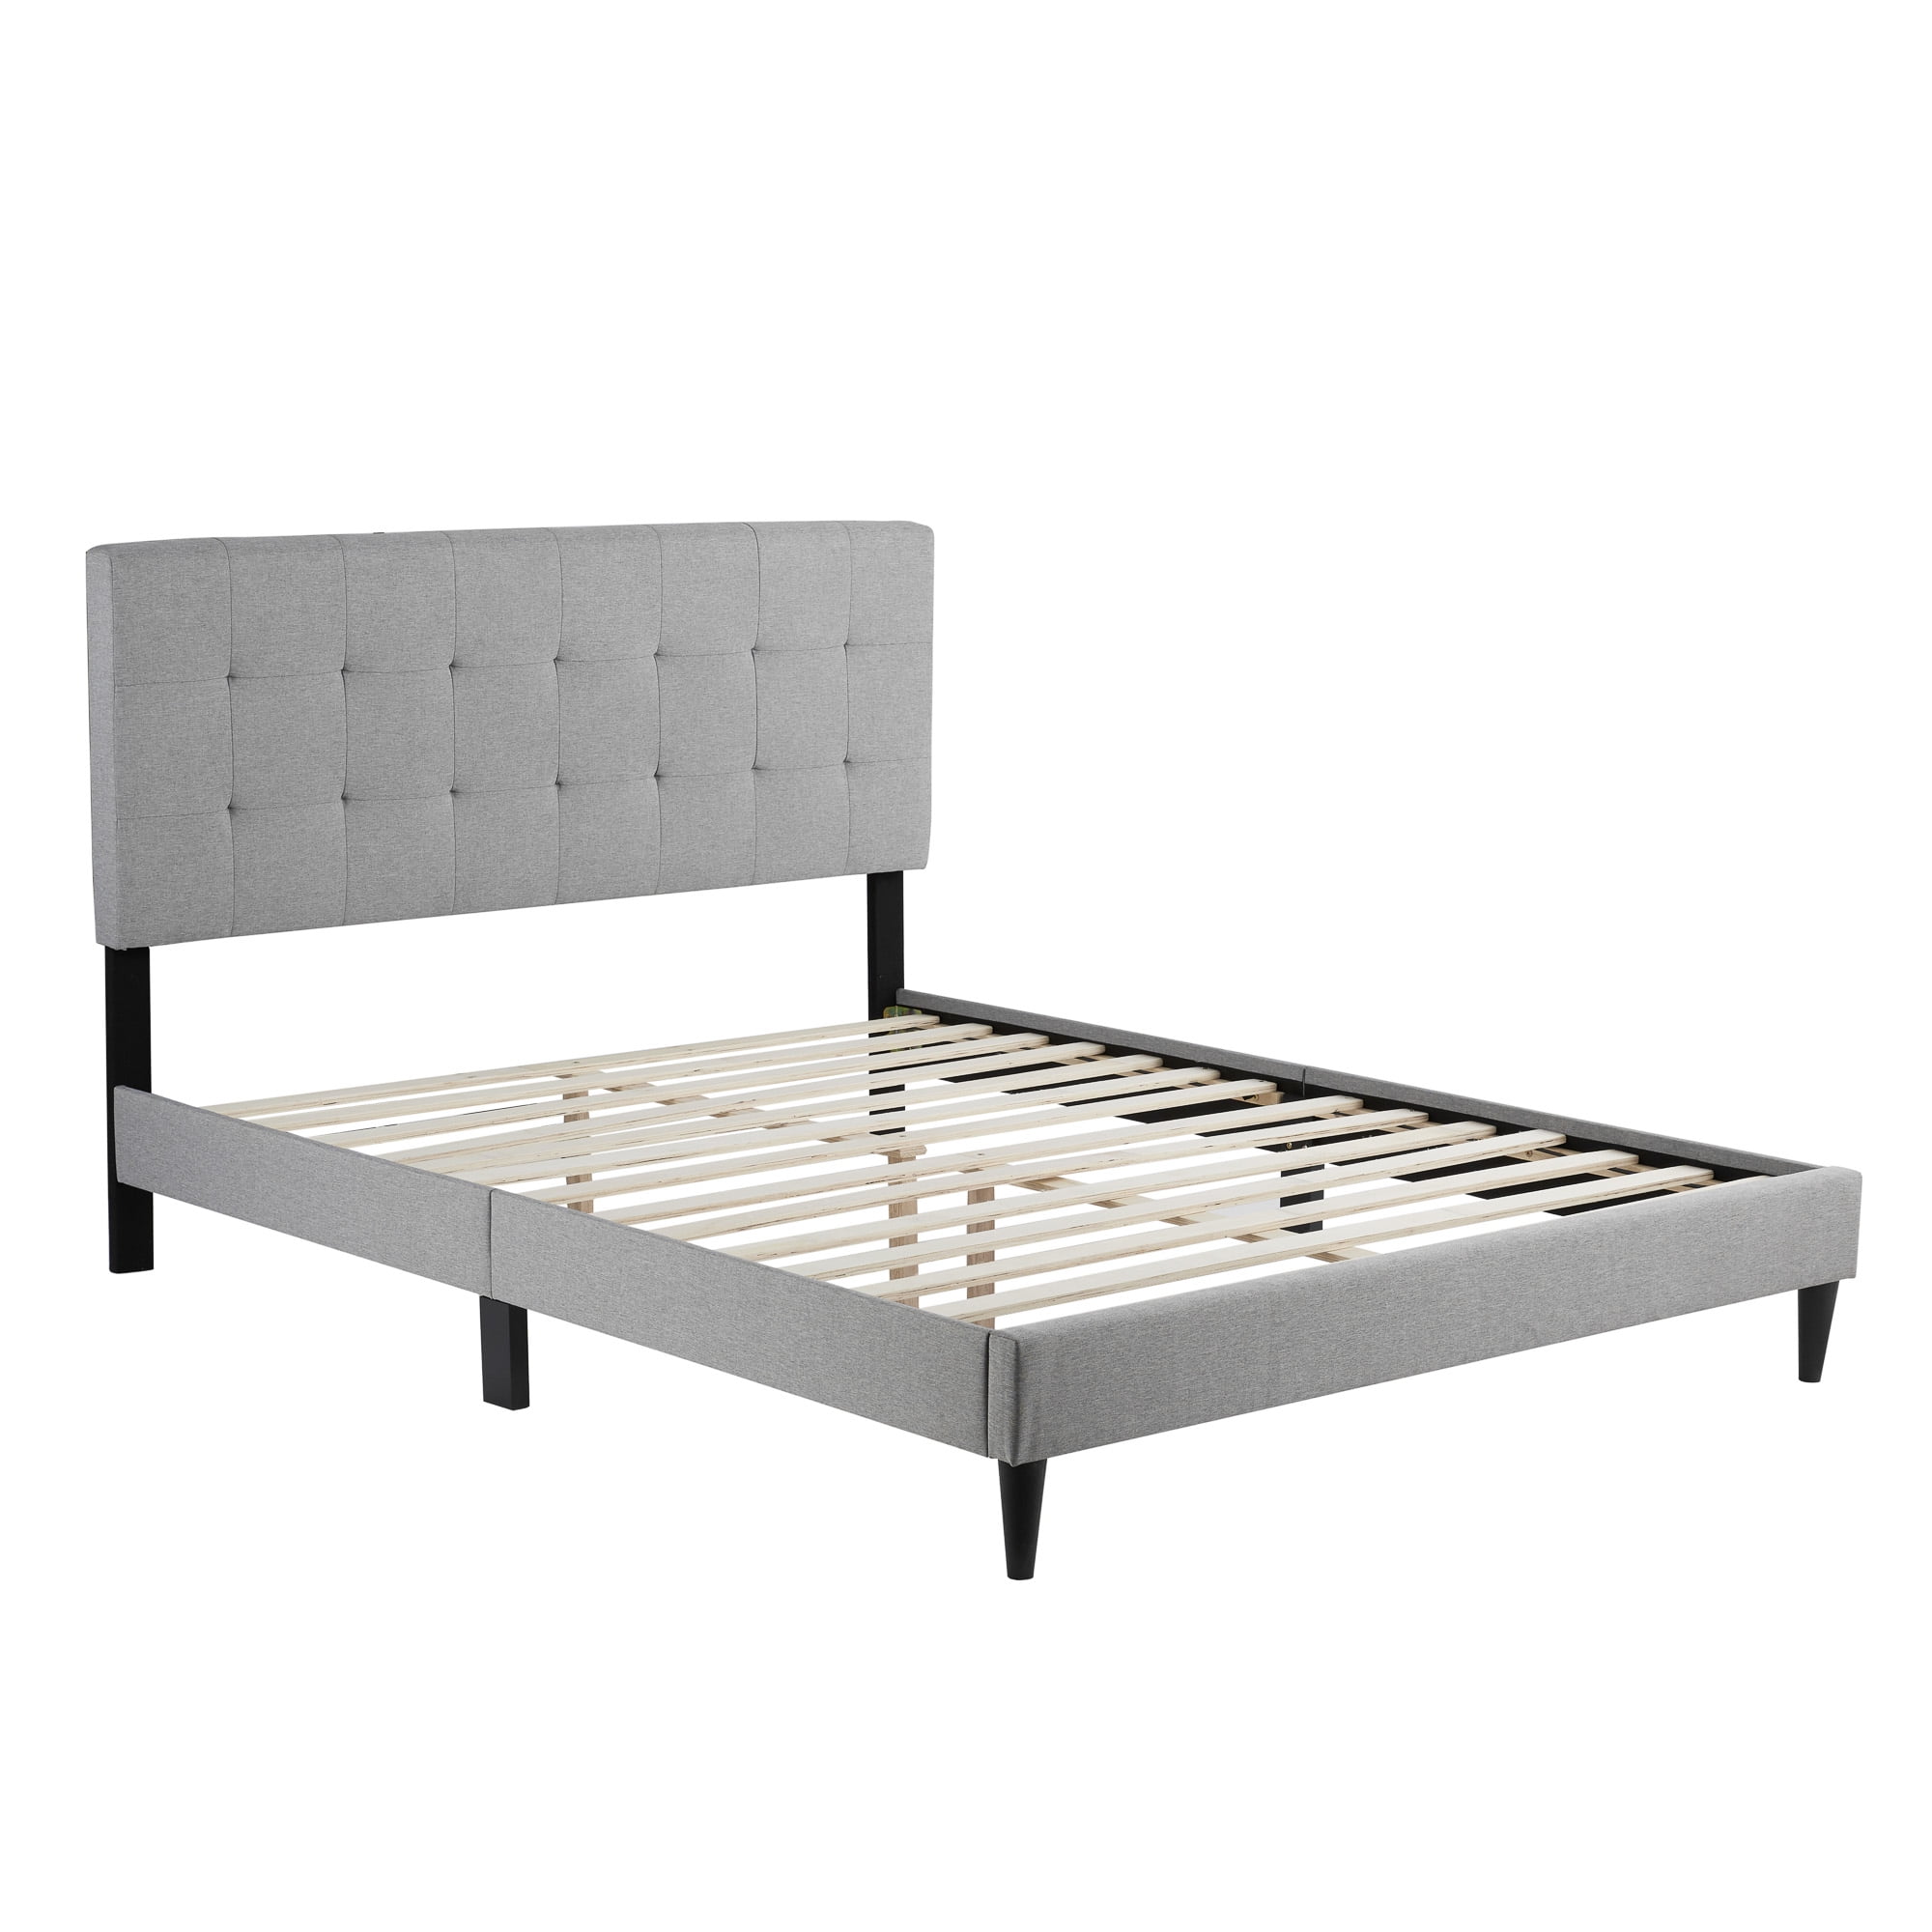 Queen Details about   DHP Janford Upholstered Bed Black Faux Leather 